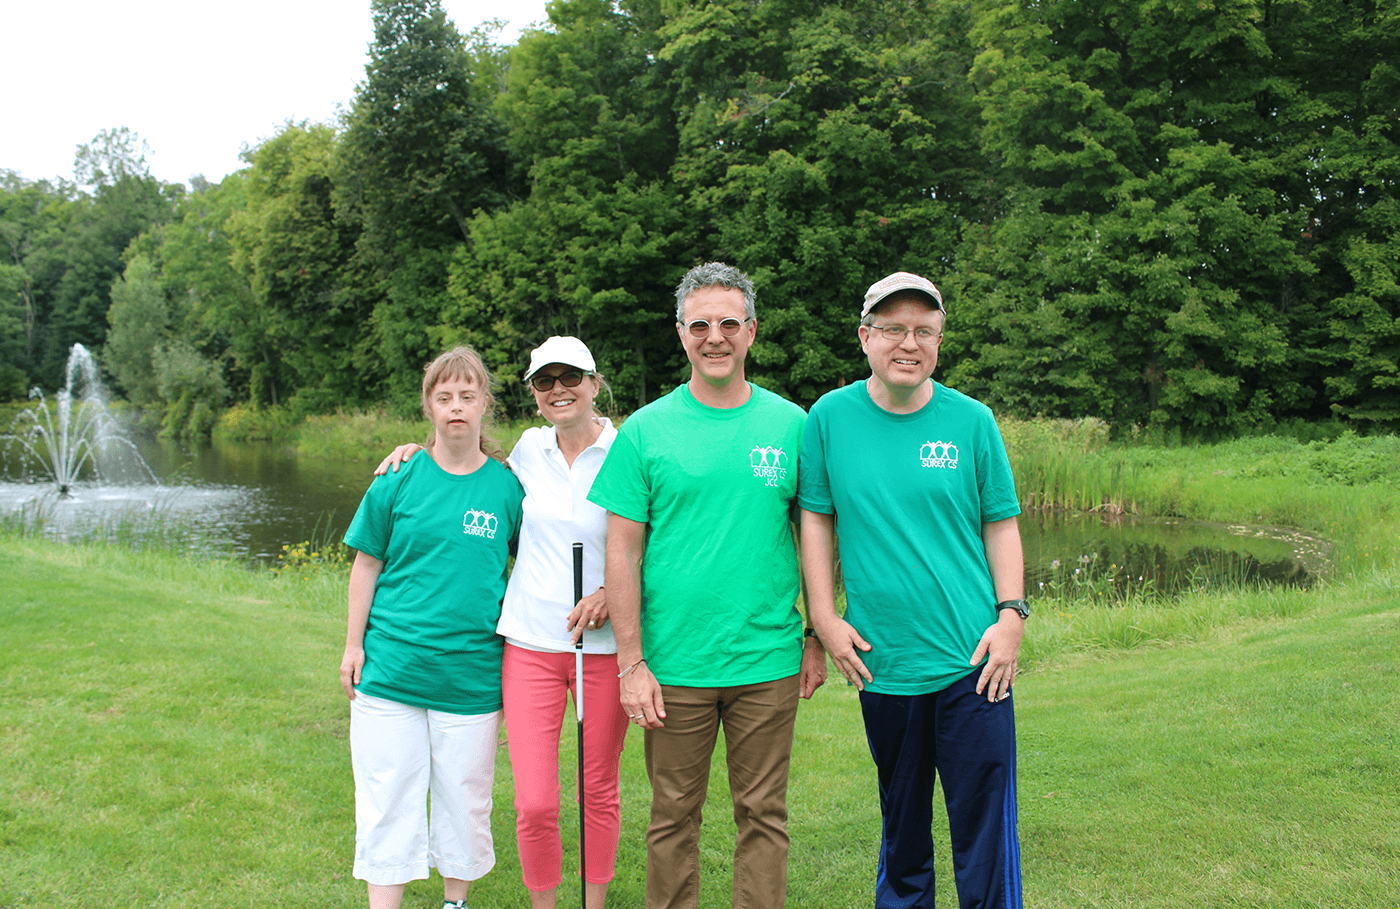 Annual Terry Stacey Memorial Golf Tournament 2019